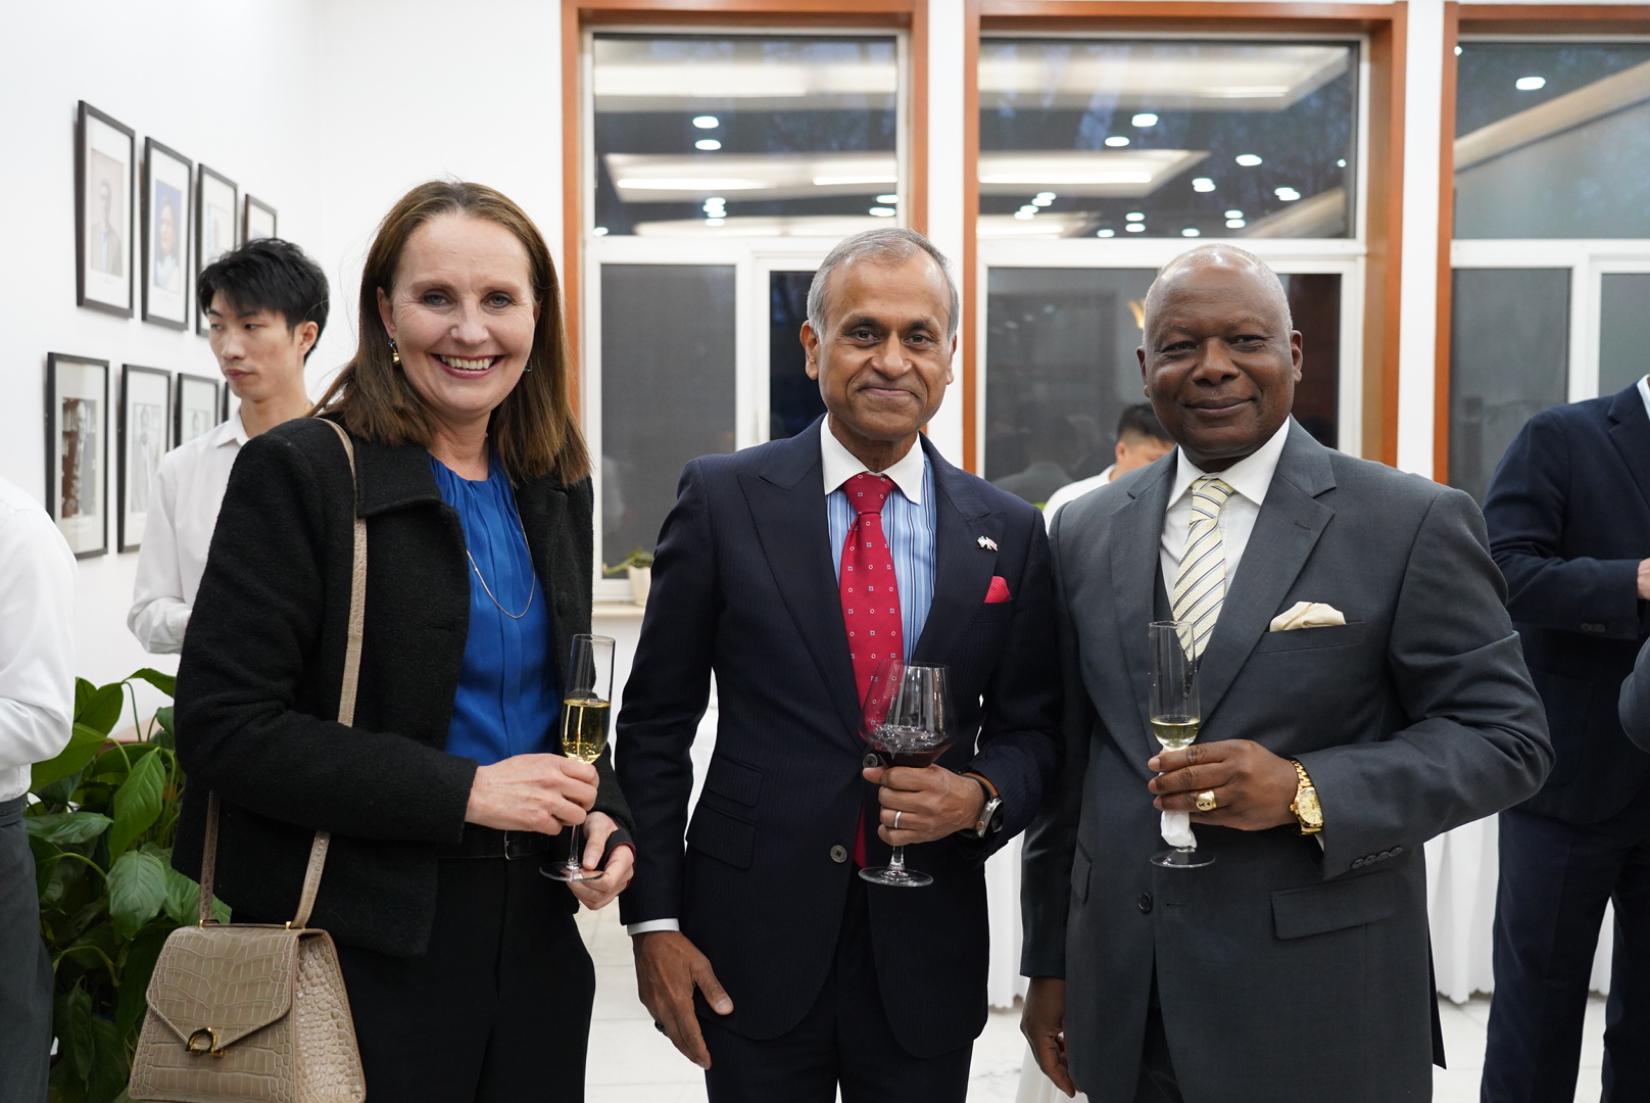 Her Excellency Ms. Signe Brudeset, Ambassador of Norway to China (left), Mr Siddharth Chatterjee, UN in China Resident Coordinator (middle), His Excellency Martin Mpana, Ambassador of Cameroon to China (right)